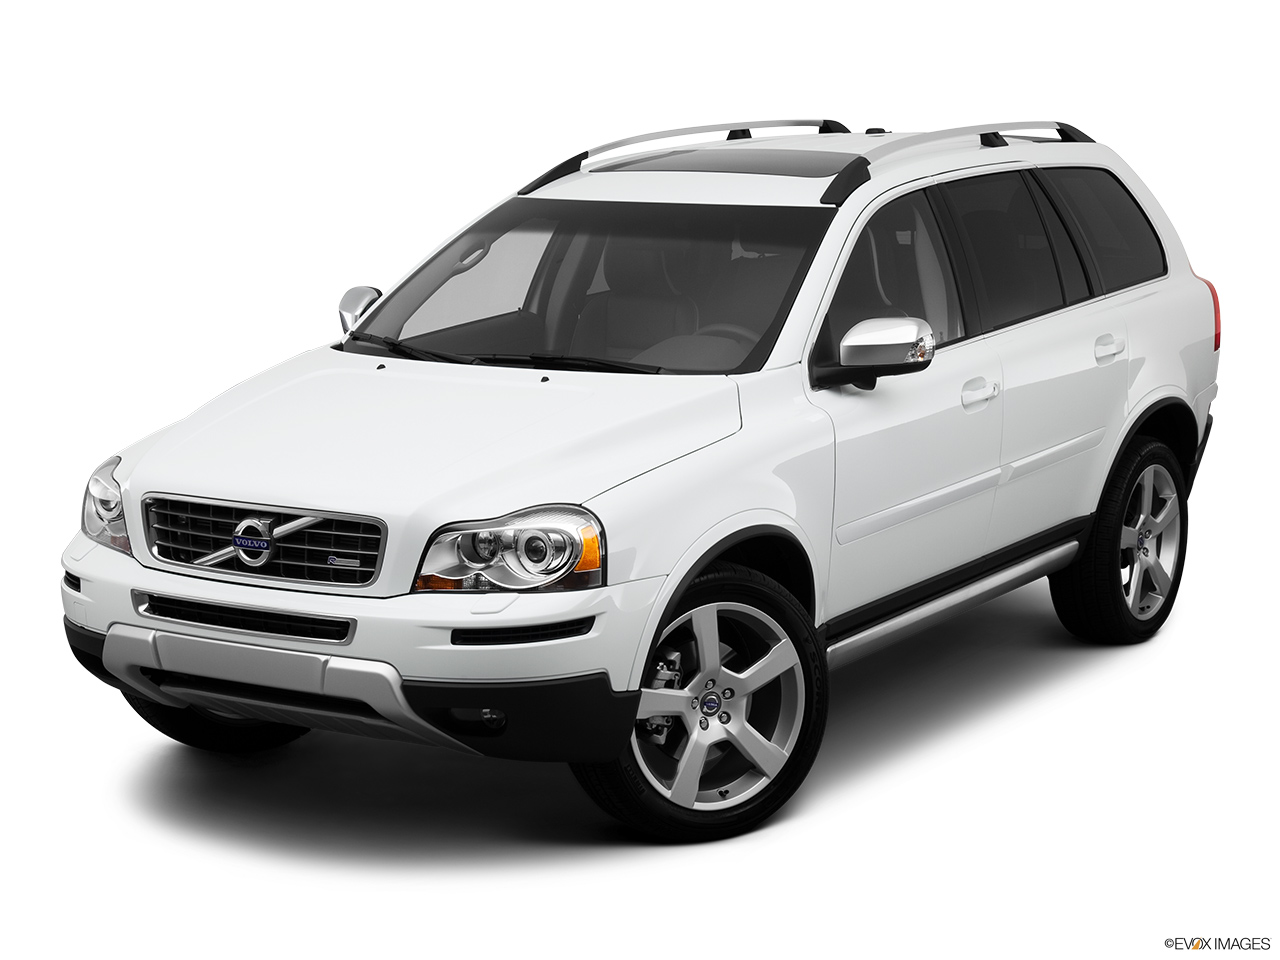 2012 Volvo XC90 R-Design Front angle view. 